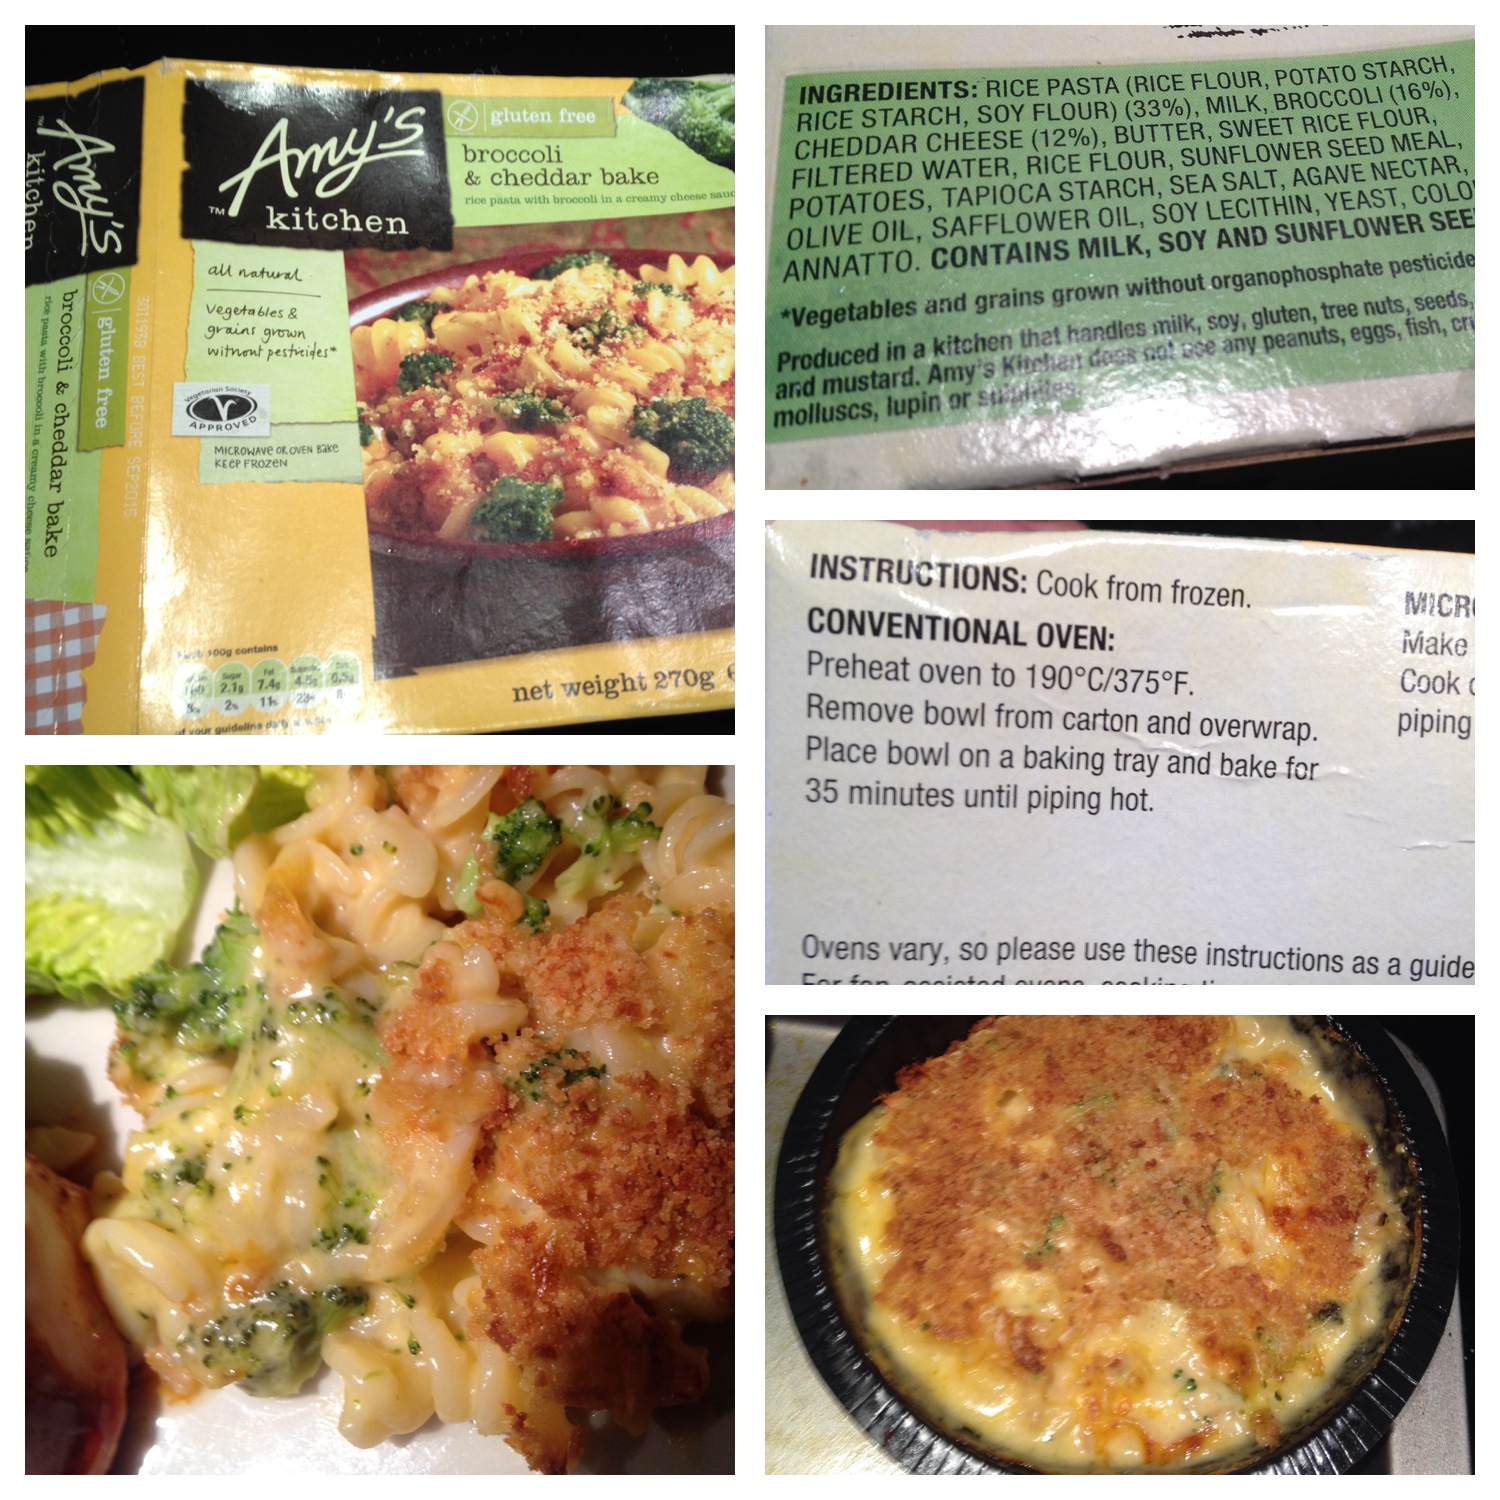 Product Review Broccoli Cheddar Bake By Amys Kitchen